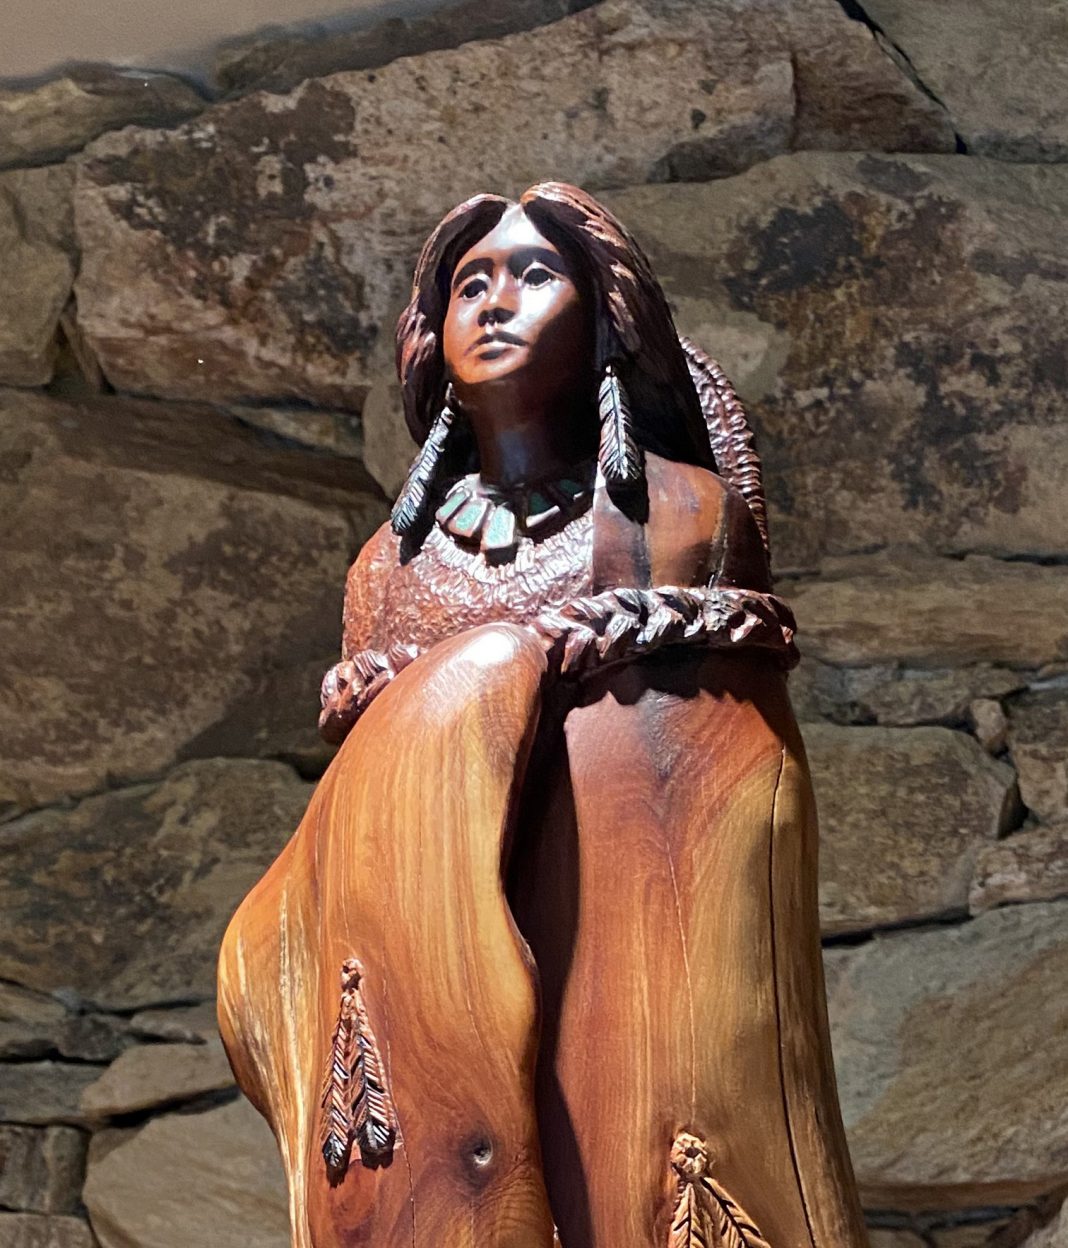 Bob Boomer Woman Child On Back Native American Indian woman baby child gourds pottery western wood sculpture close